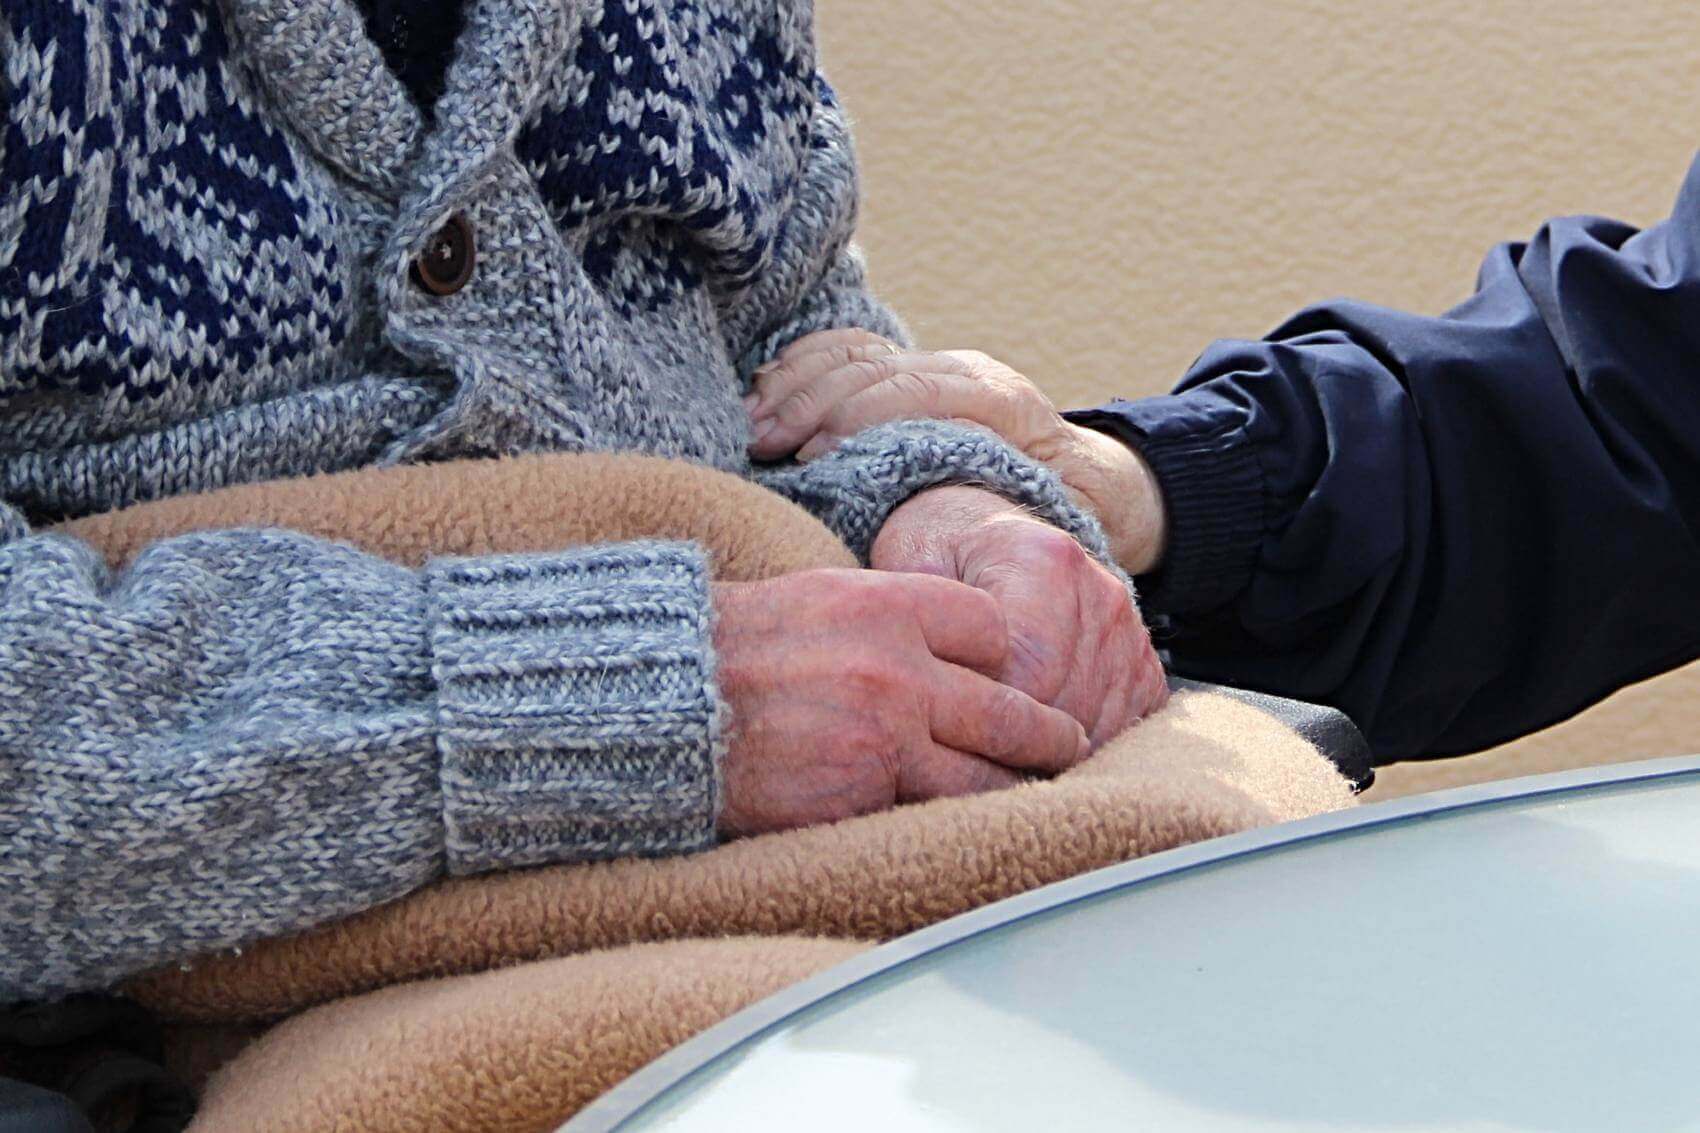 person holding an elderly person's arm